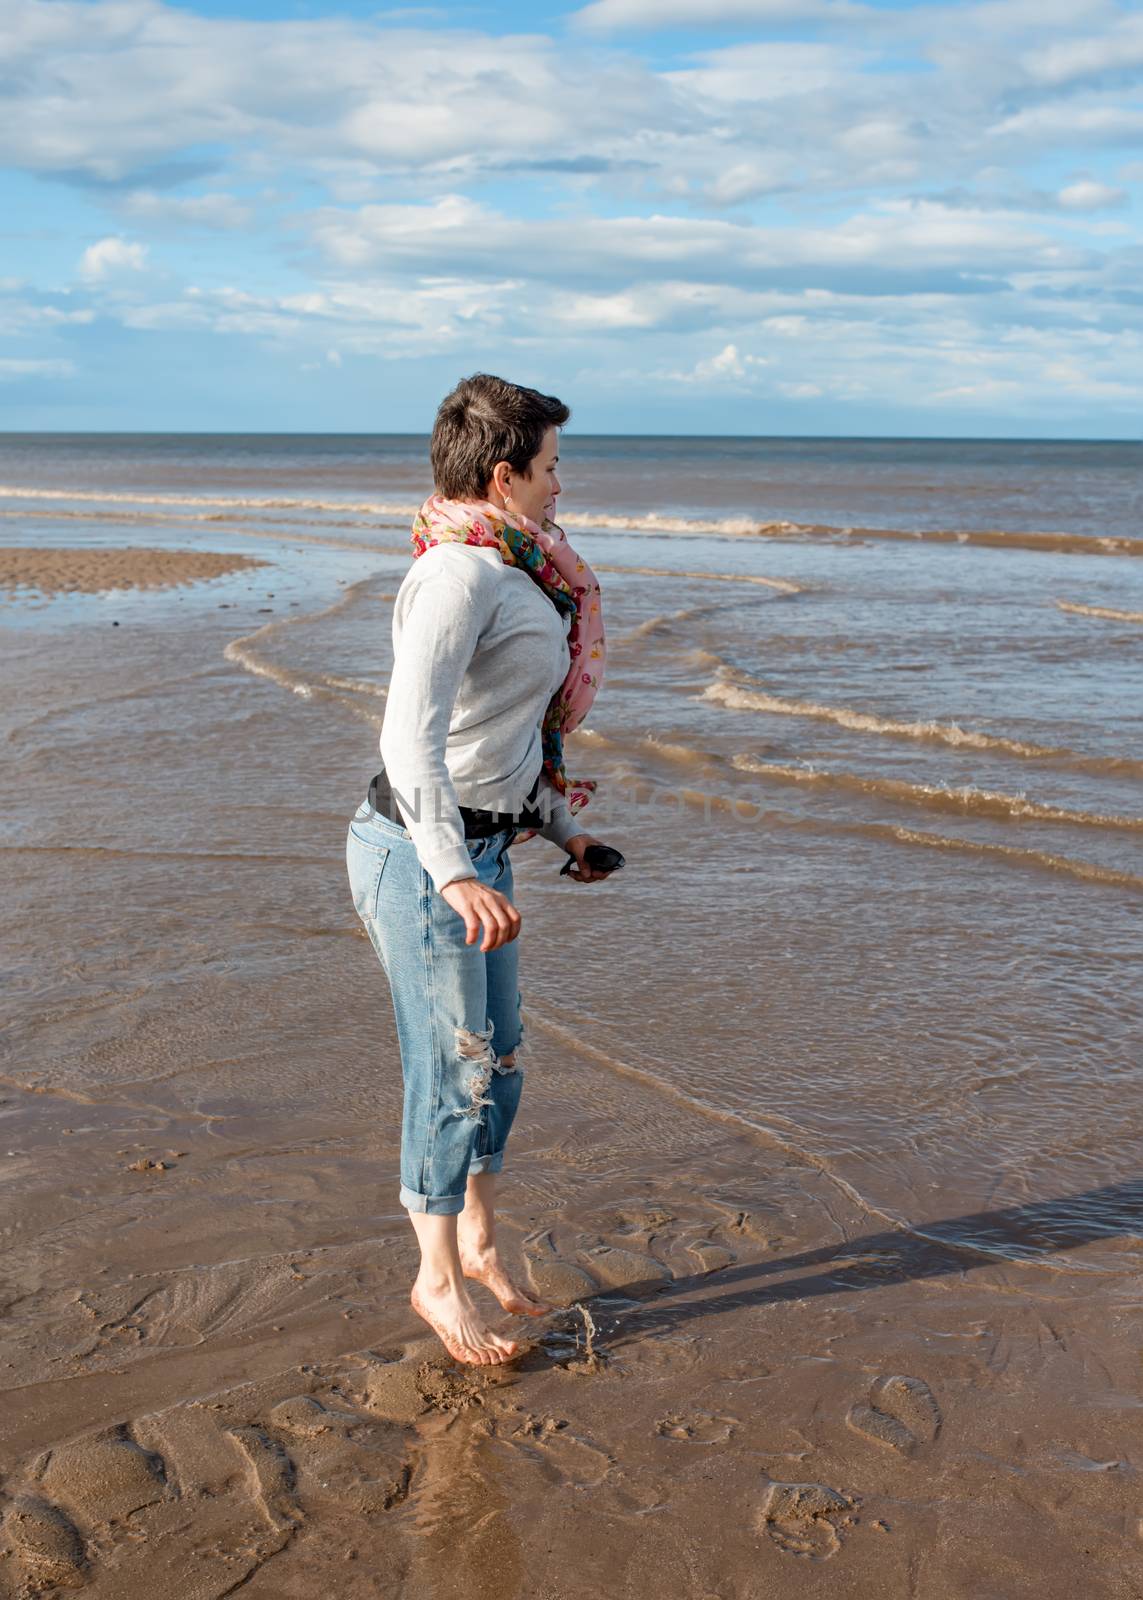 Barefoot woman wearing jeans and grey jumper jumping on the beach